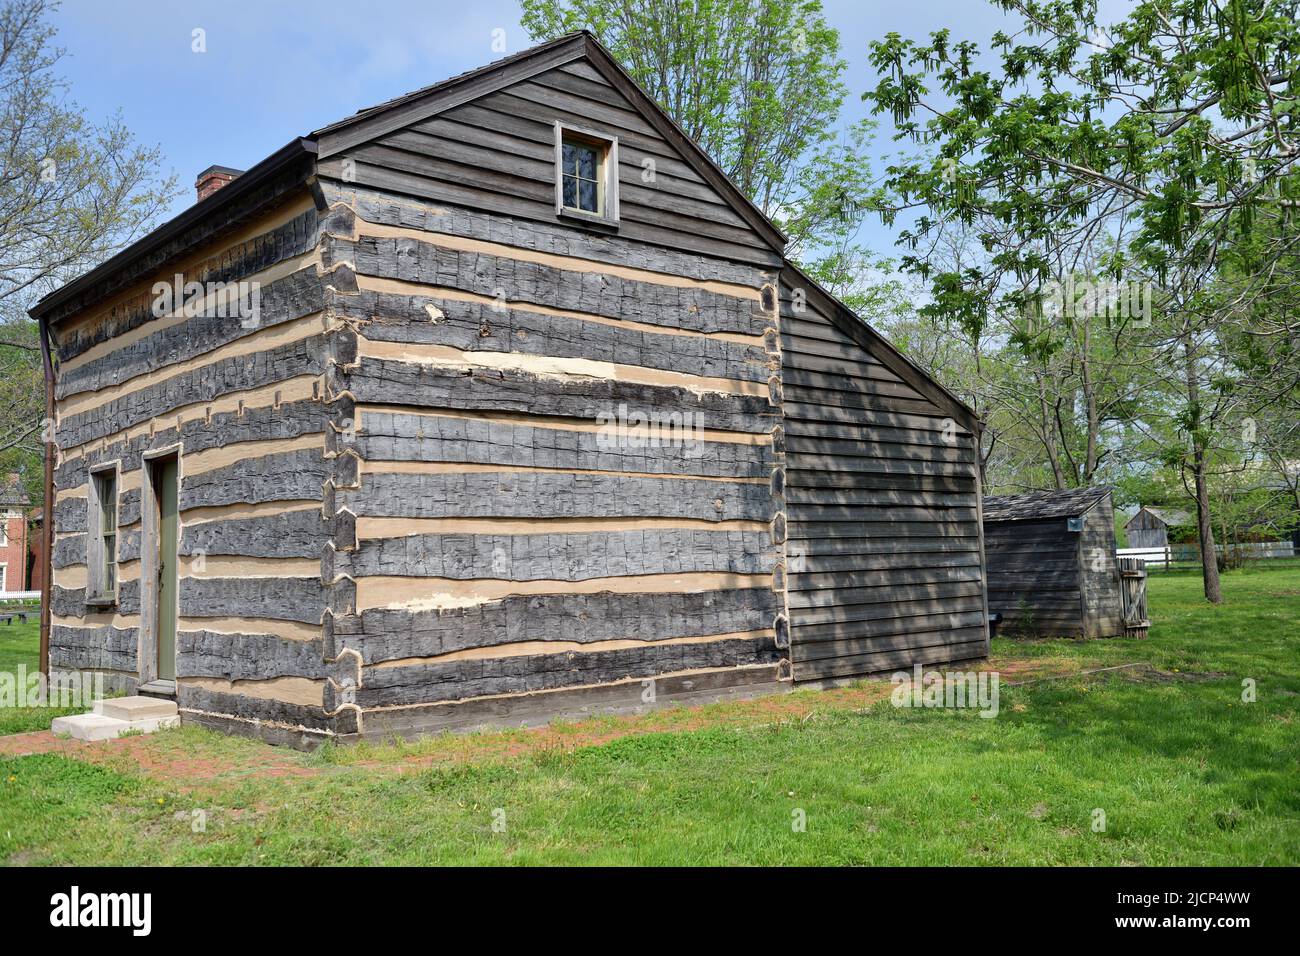 Nauvoo, Illinois, USA. A log cabin or home part of the local historical site. The well maintained structure is part of the Nauvoo Historic District. Stock Photo